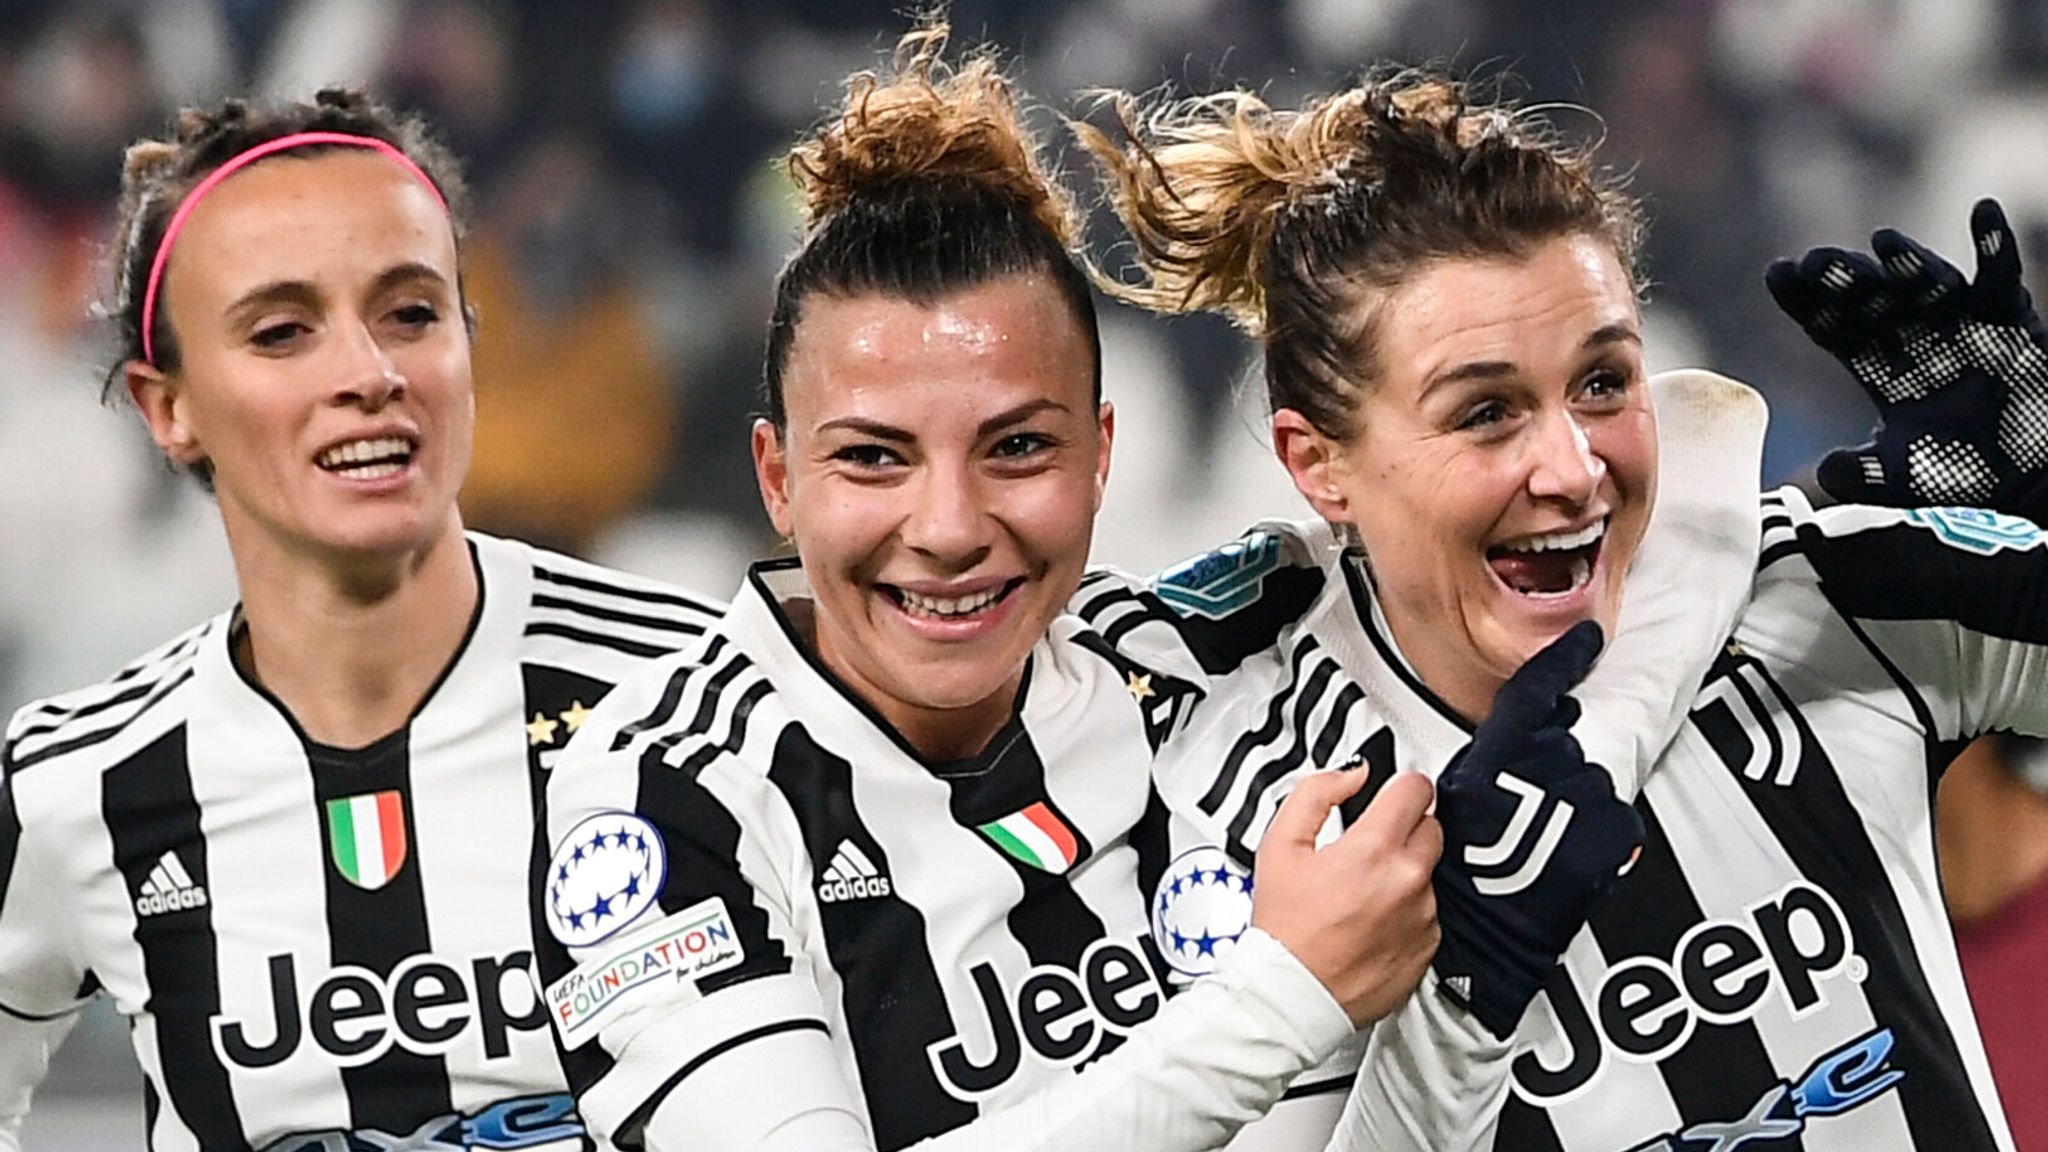 What the professionalization of Serie A Femminile means for